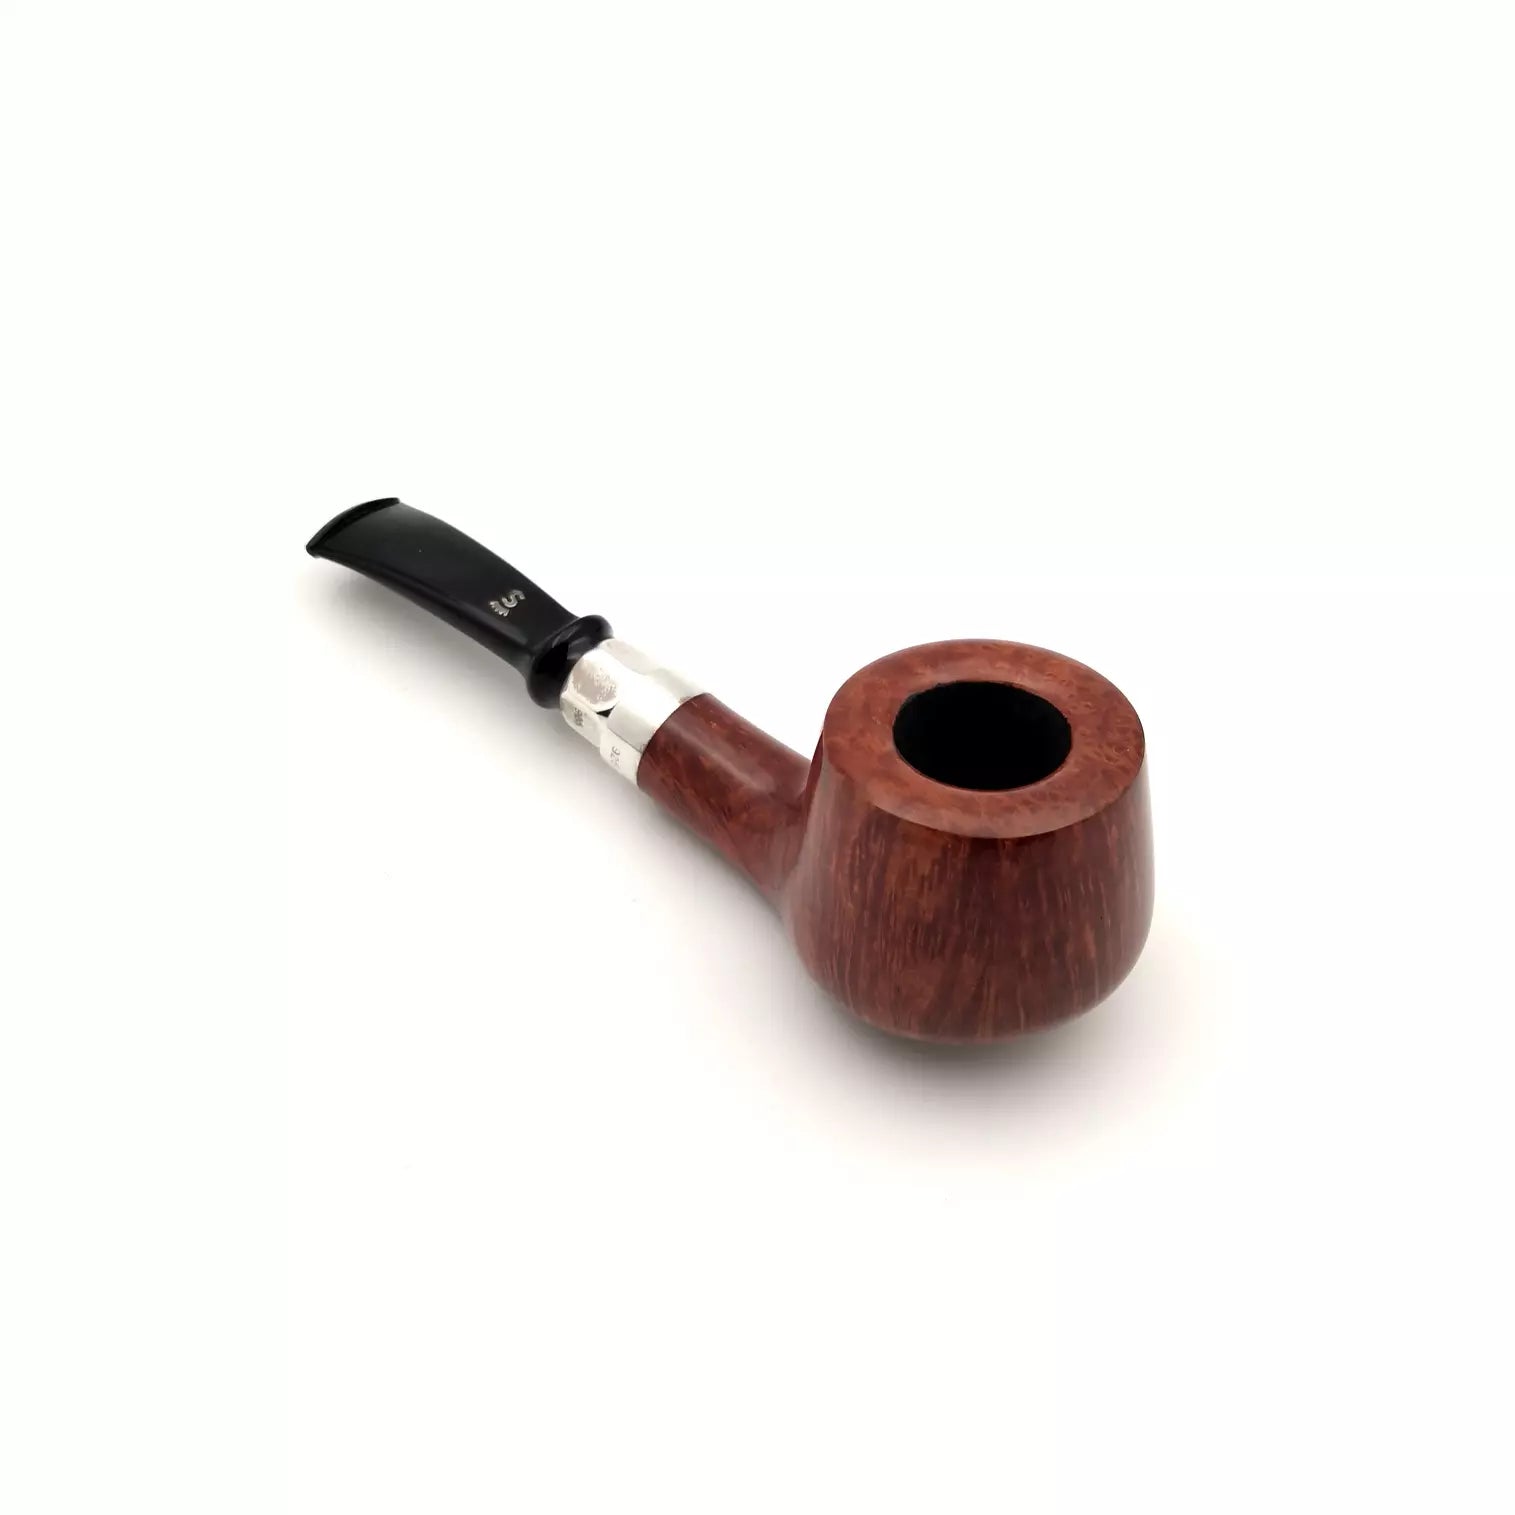 44. STANWELL PIPE OF THE YEAR 1999